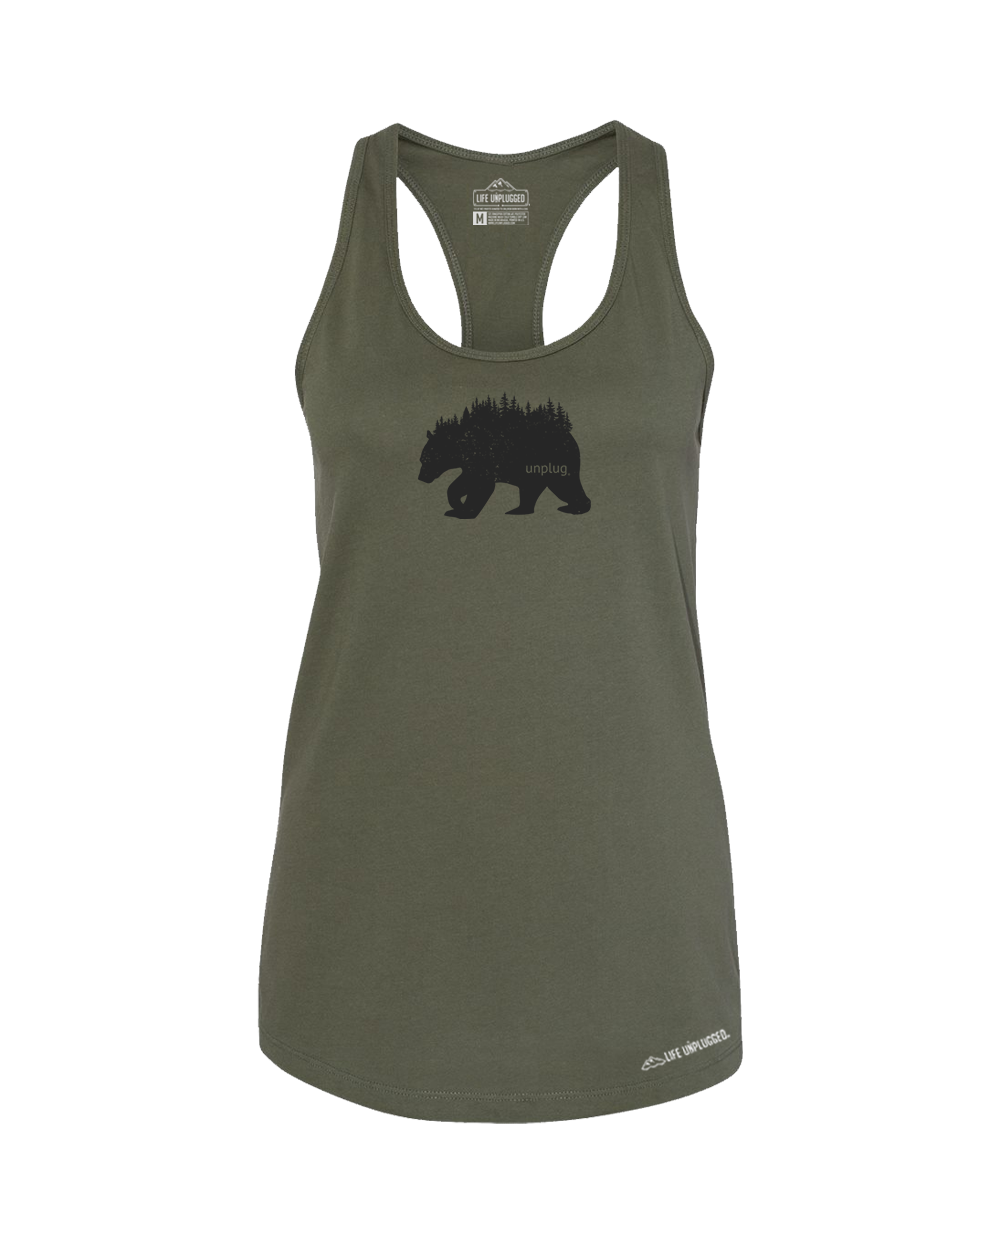 Bear In The Trees Premium Women's Relaxed Fit Racerback Tank Top